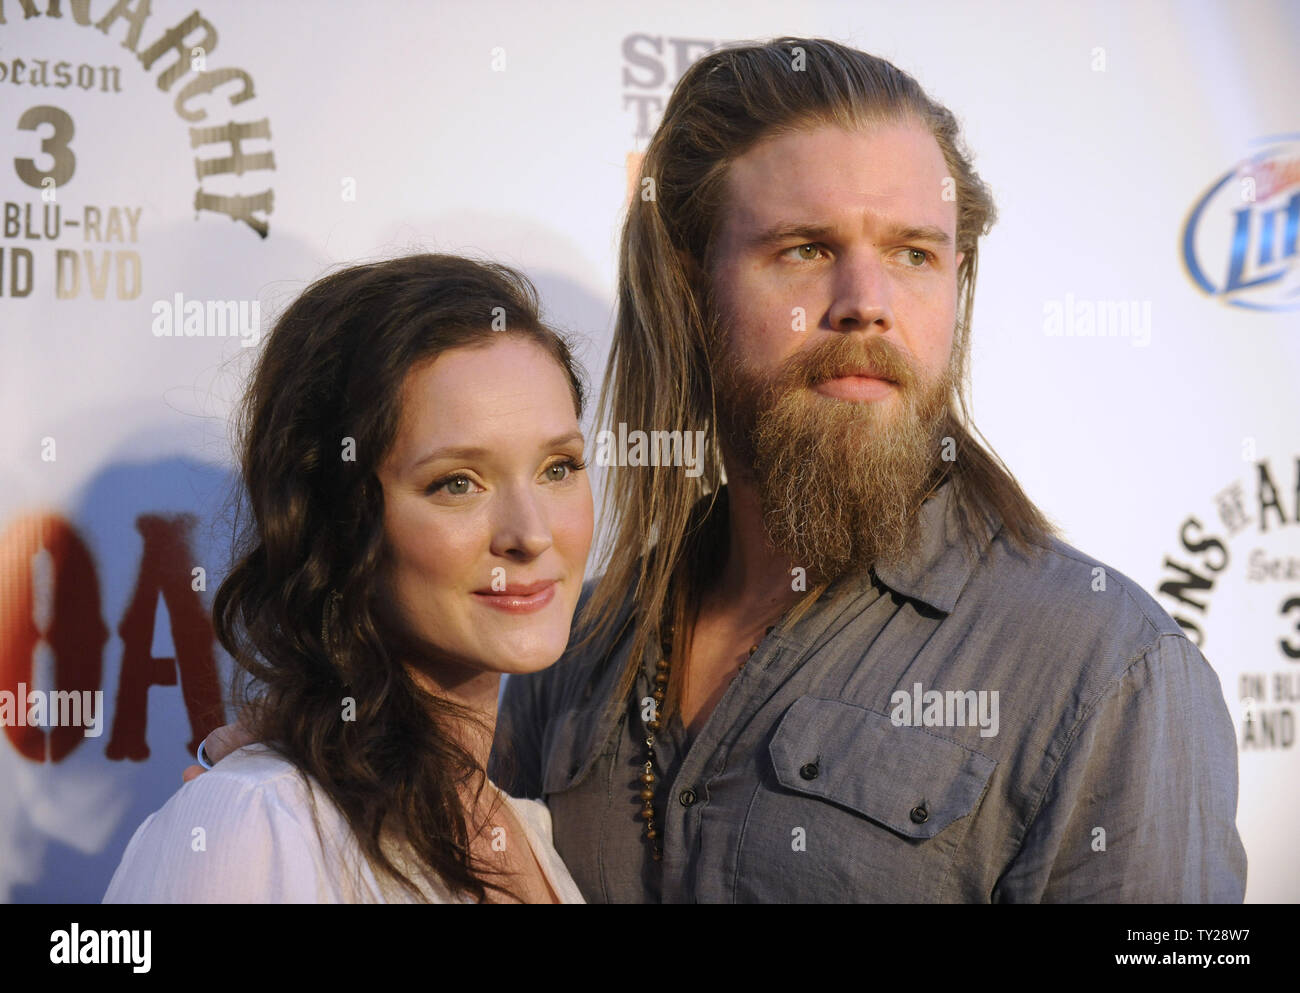 Cast member Ryan Hurst (R) and Molly Clarkson attend the Sons of Anarchy, Season 4 premiere screening at the Arclight Theatre in the Hollywood section of Los Angeles on August 30, 2011.      UPI/Phil McCarten Stock Photo